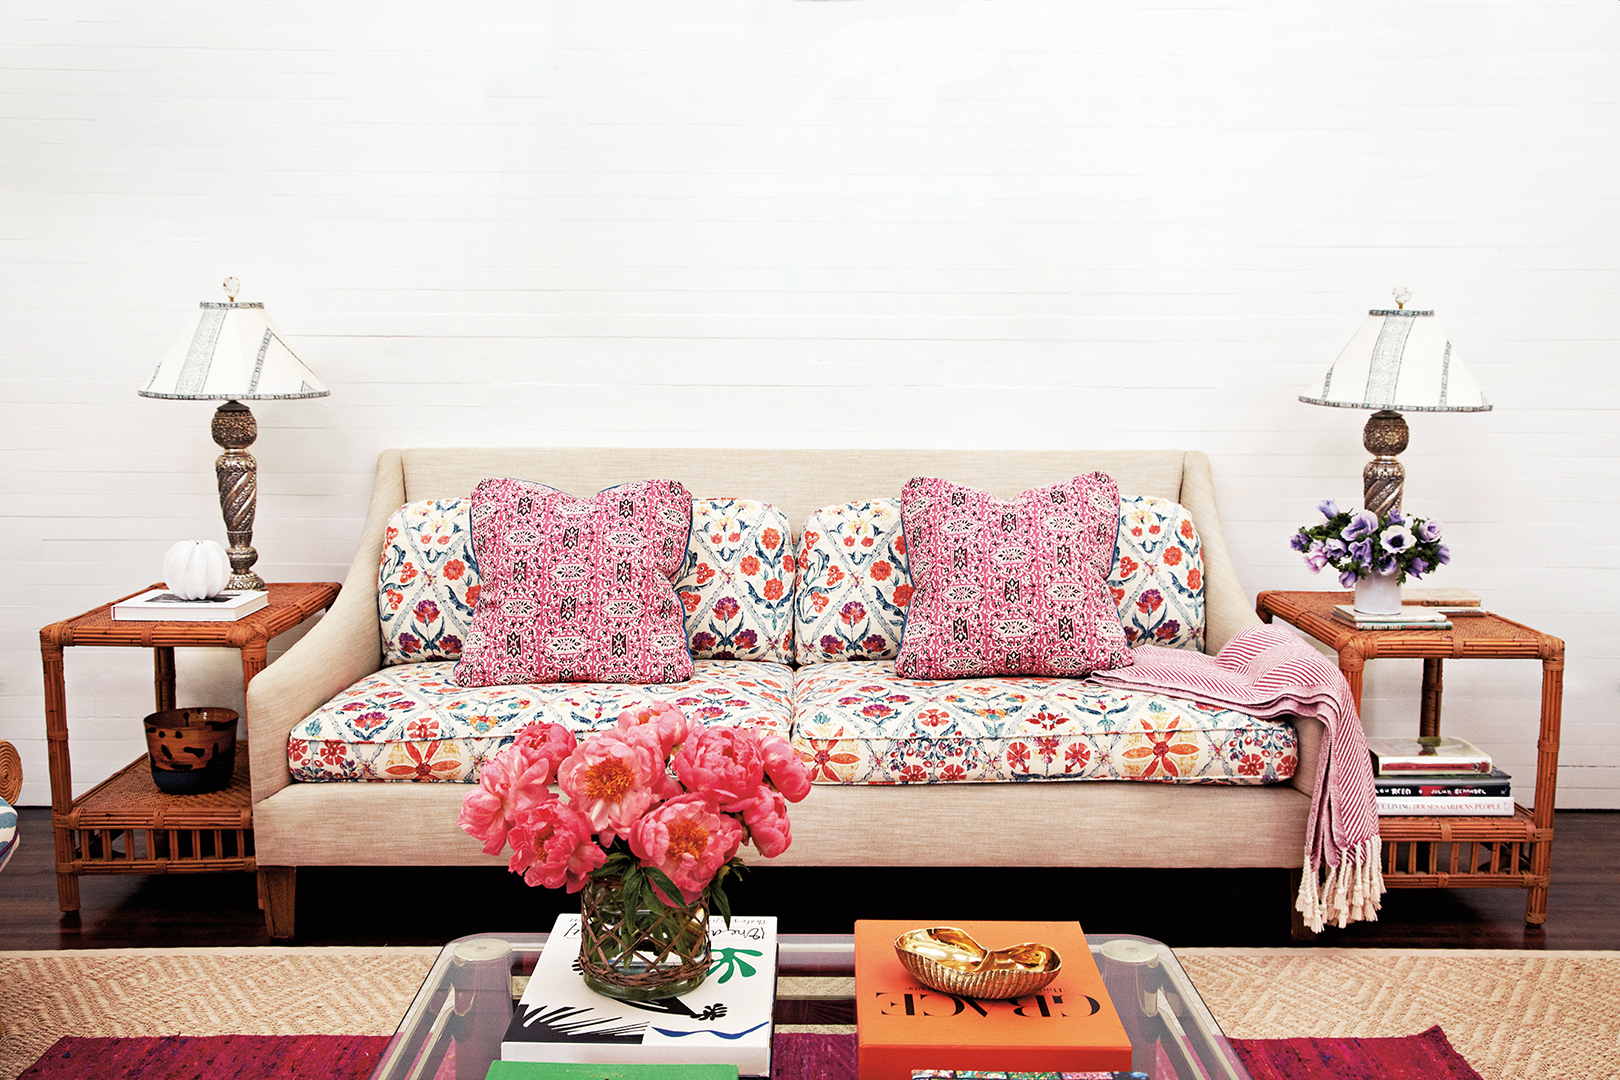 Patterned sofa with patterned pillows